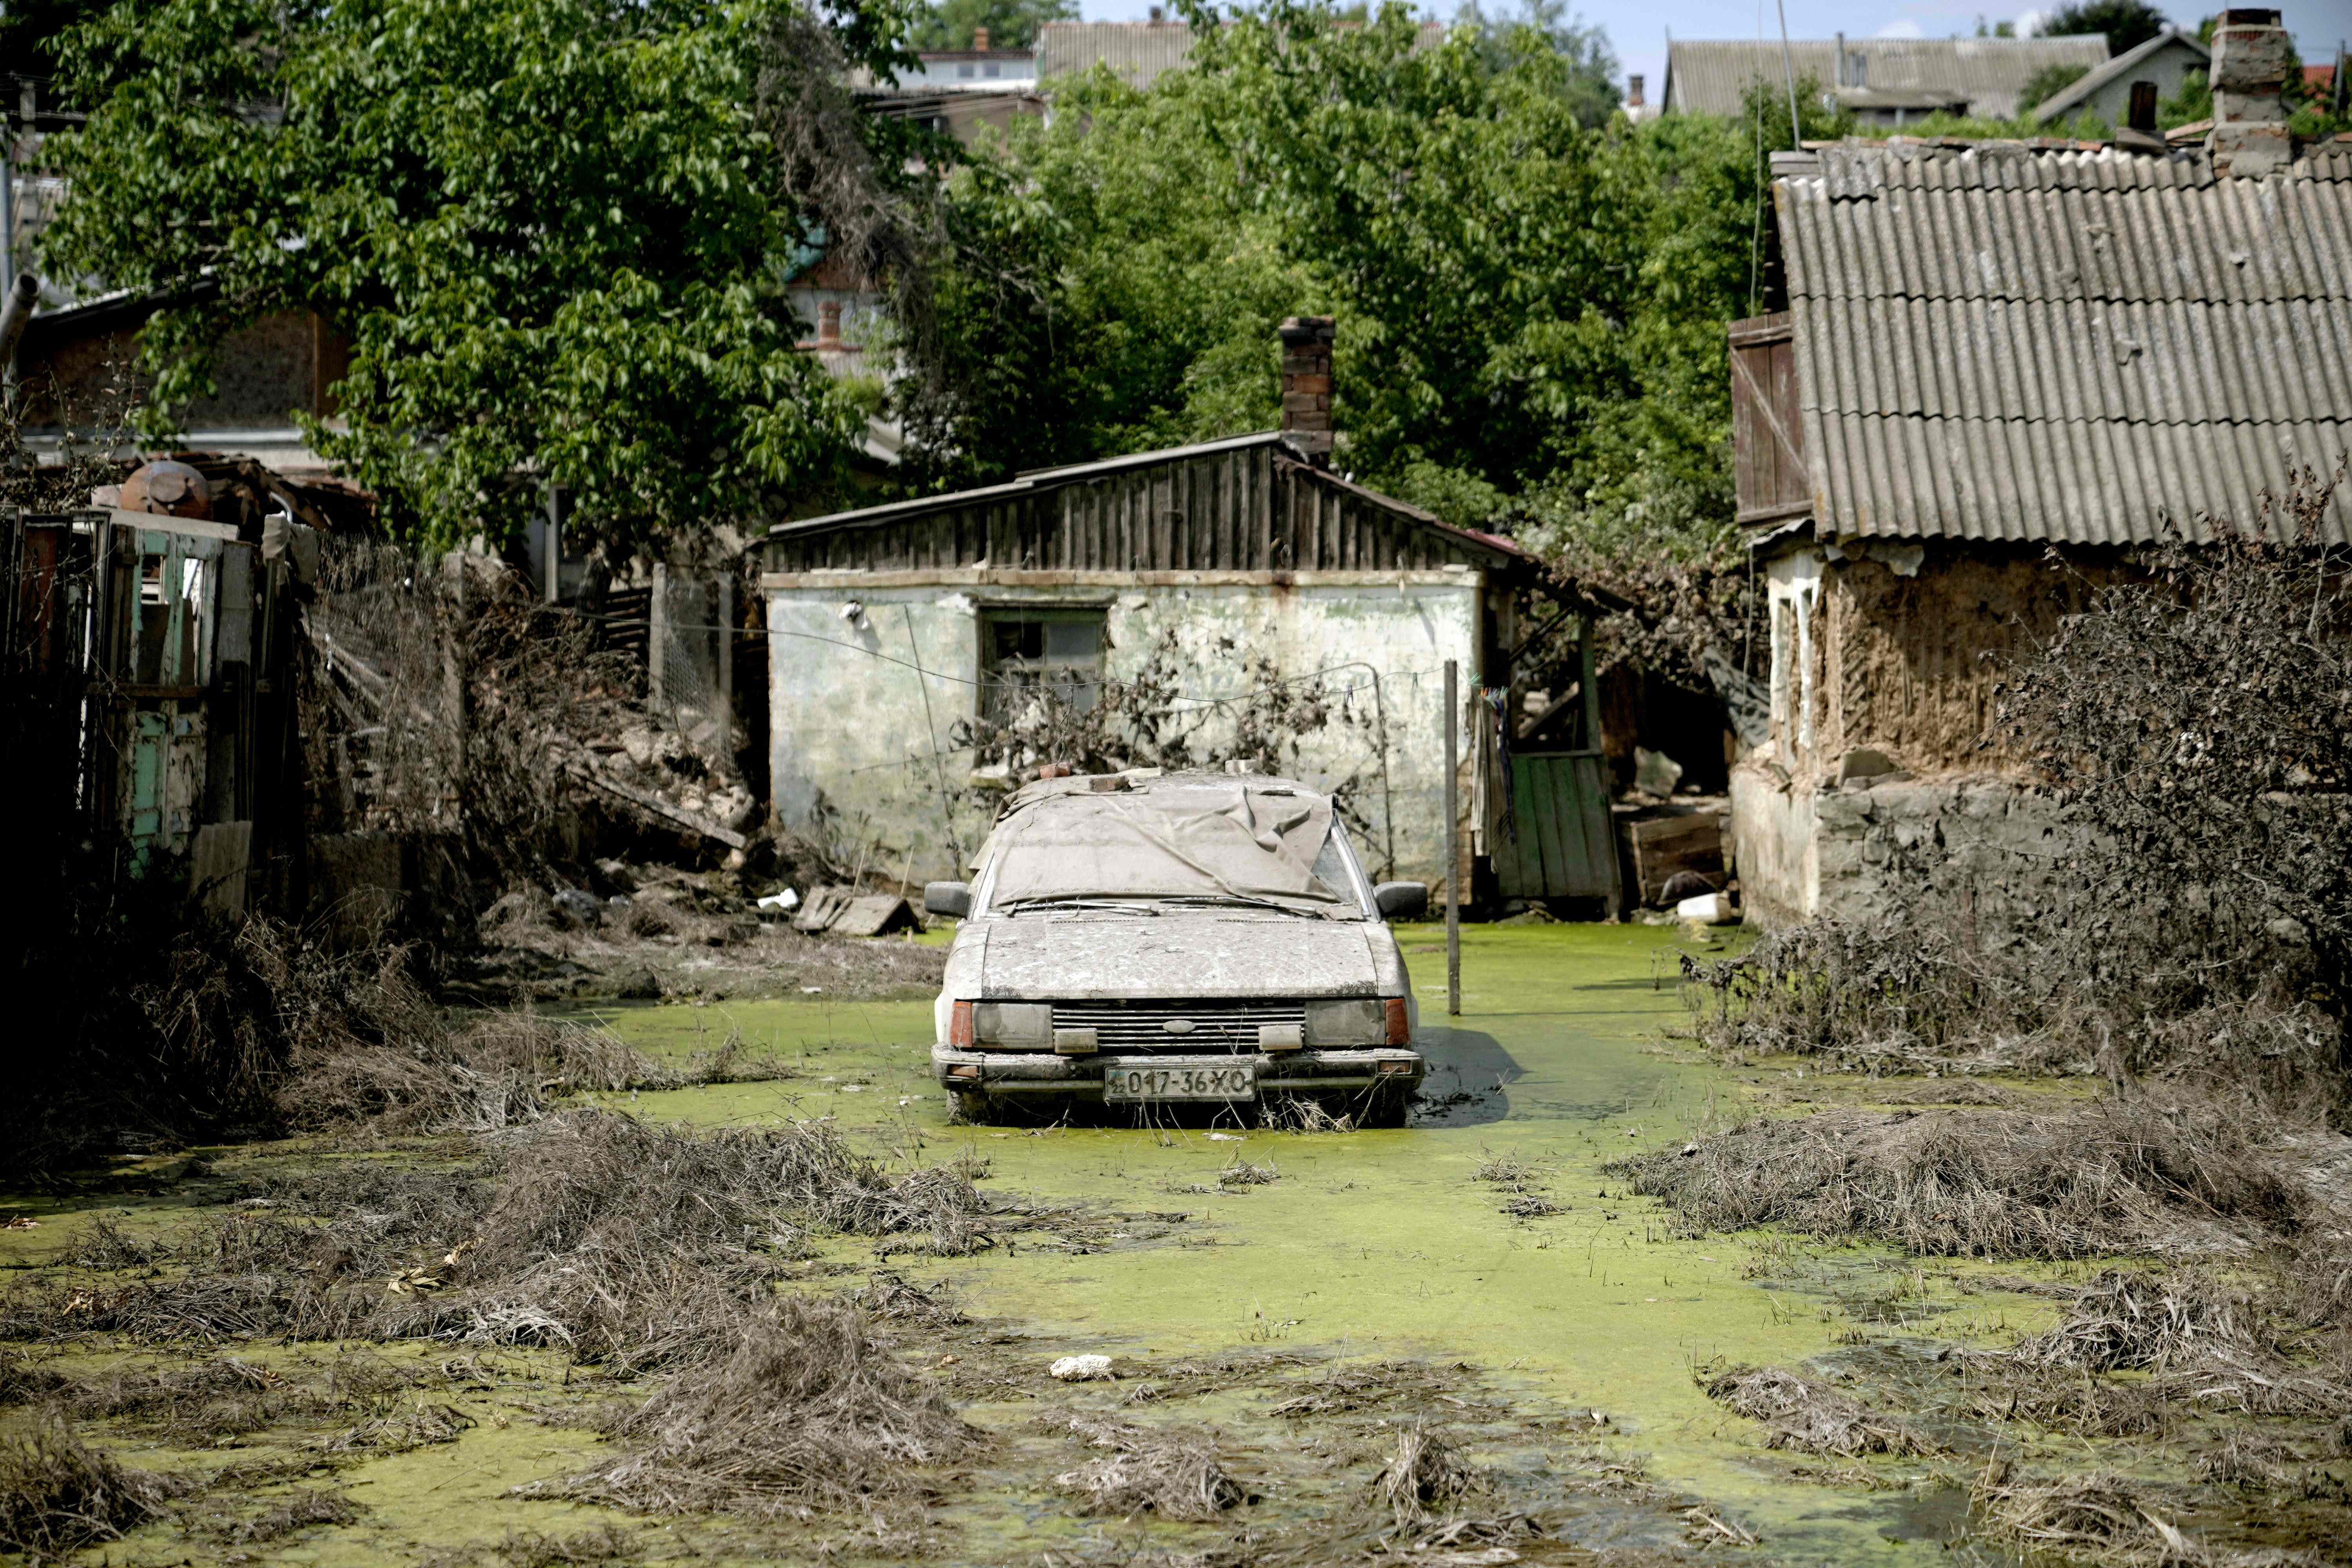 An abandoned car in Kherson in an area flooded by rising water following the collapse of the Kakhovka hydroelectric power plant dam